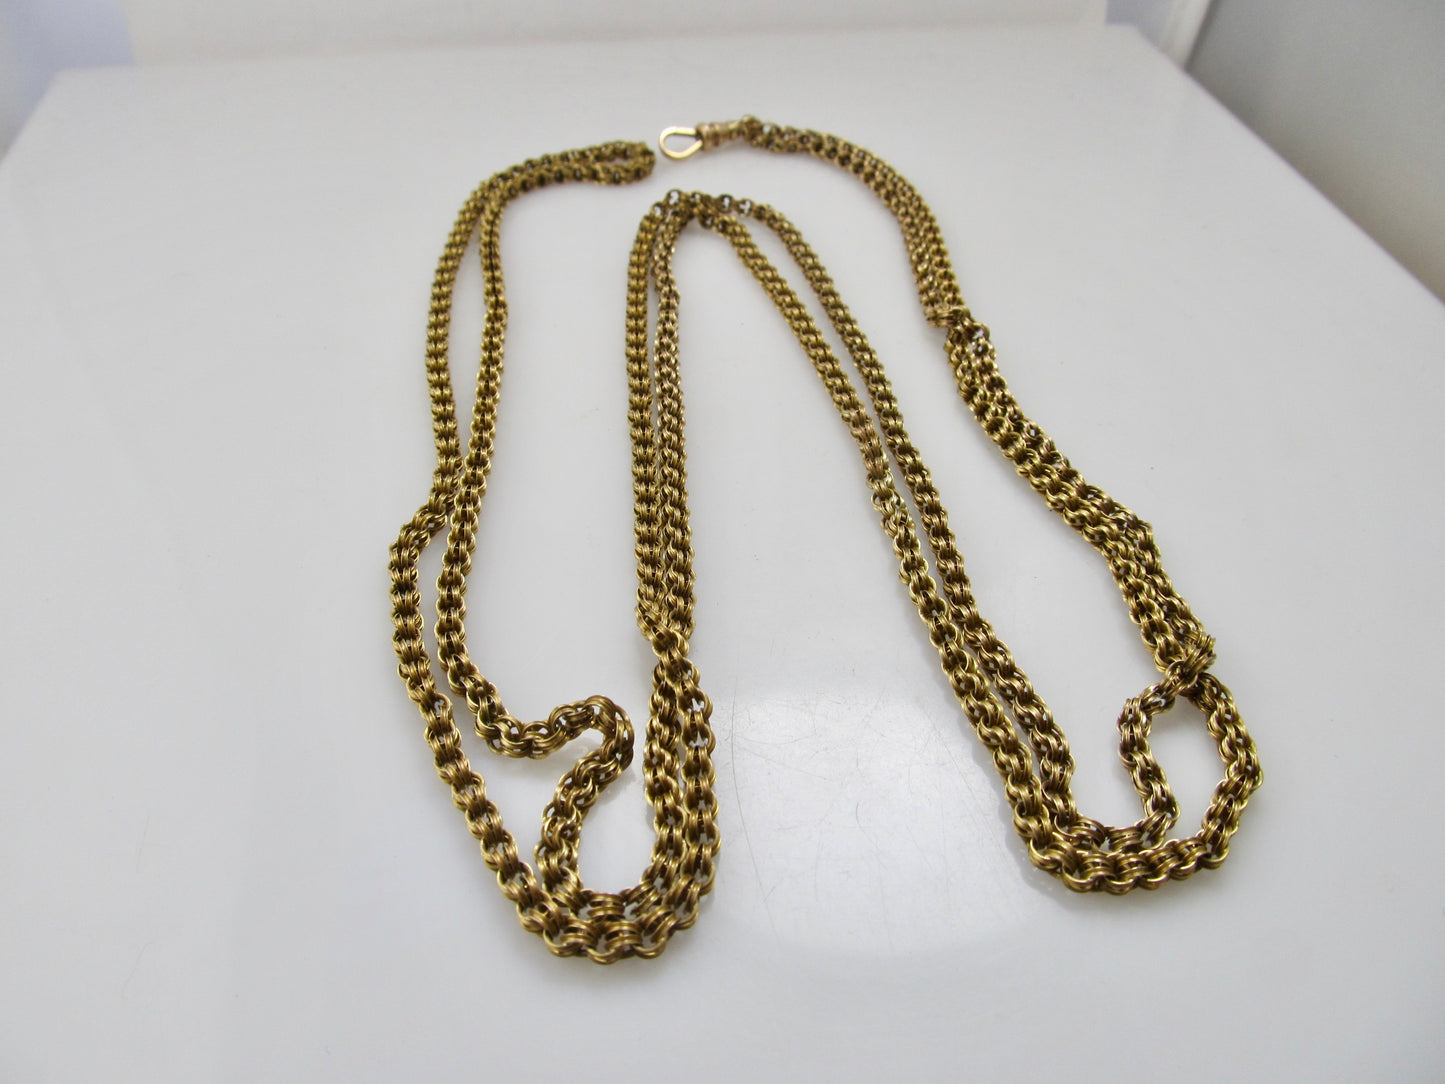 Long antique 14k yellow gold chain